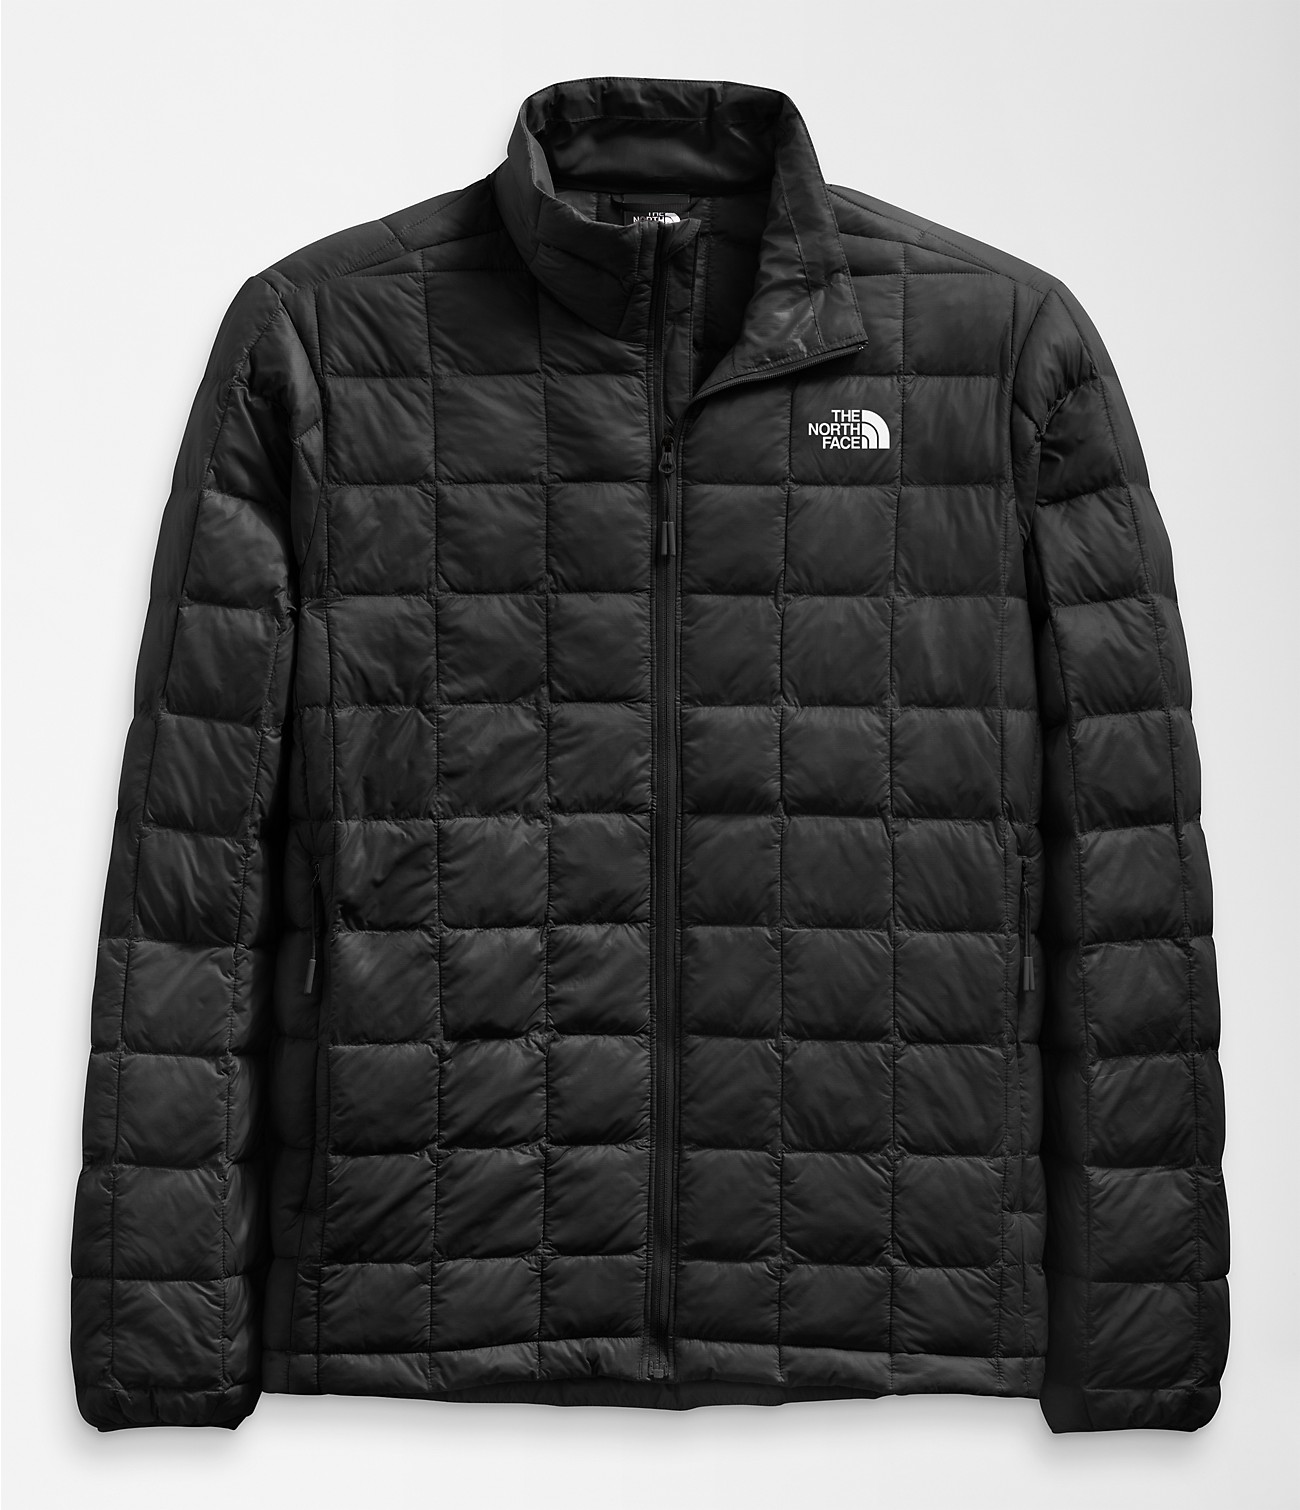 Unlock Wilderness' choice in the Jack Wolfskin Vs North Face comparison, the ThermoBall™ Eco Jacket 2.0 by The North Face